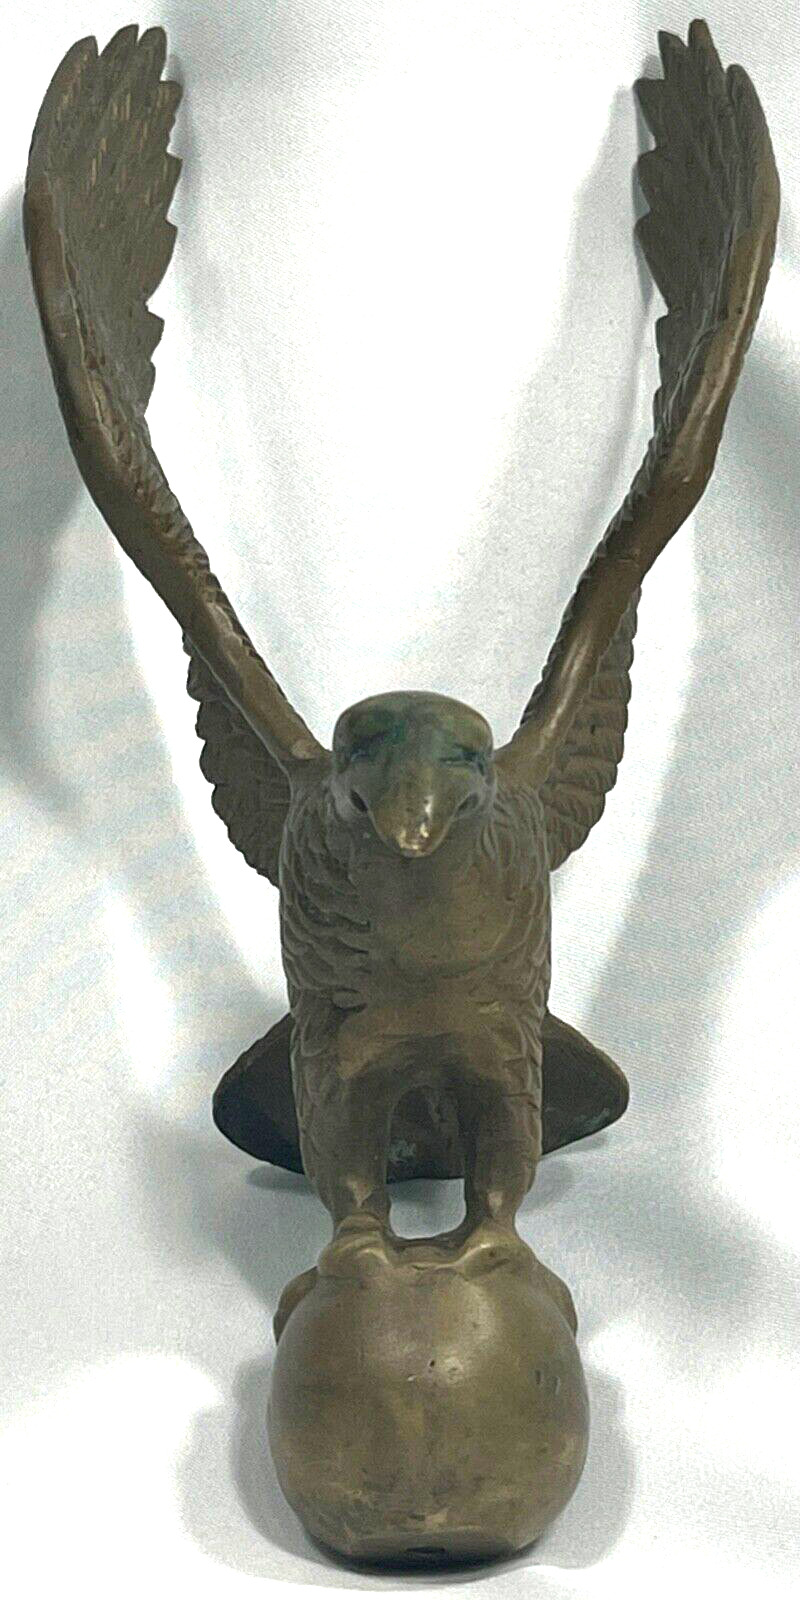 American Bald Eagle, Solid Brass, Finial Rustic Patina, Vintage